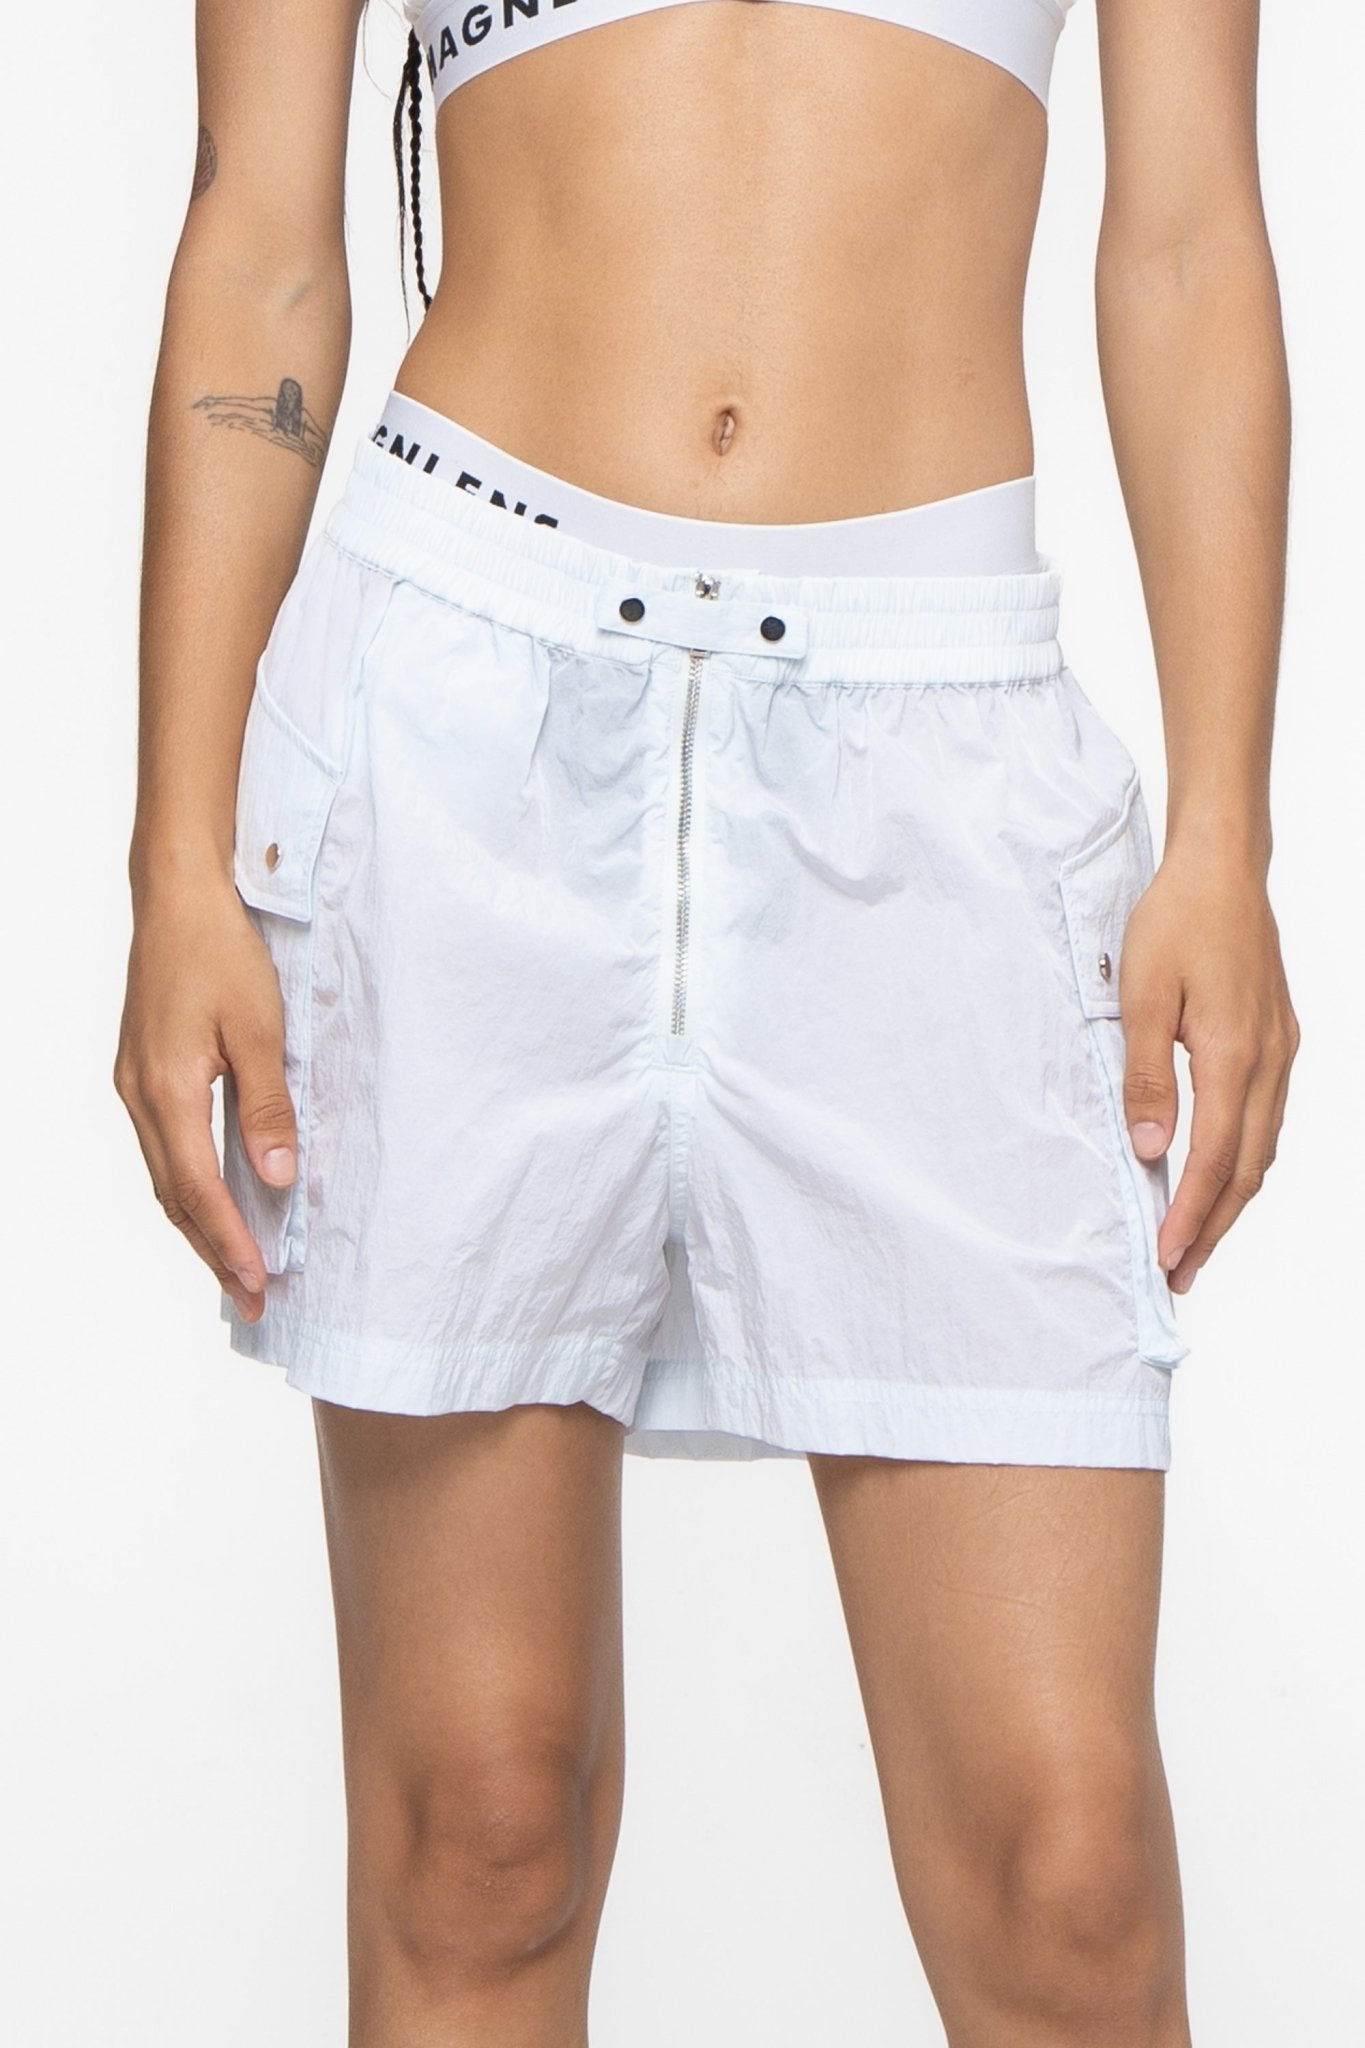 Helms Cargo Shorts - Magnlens